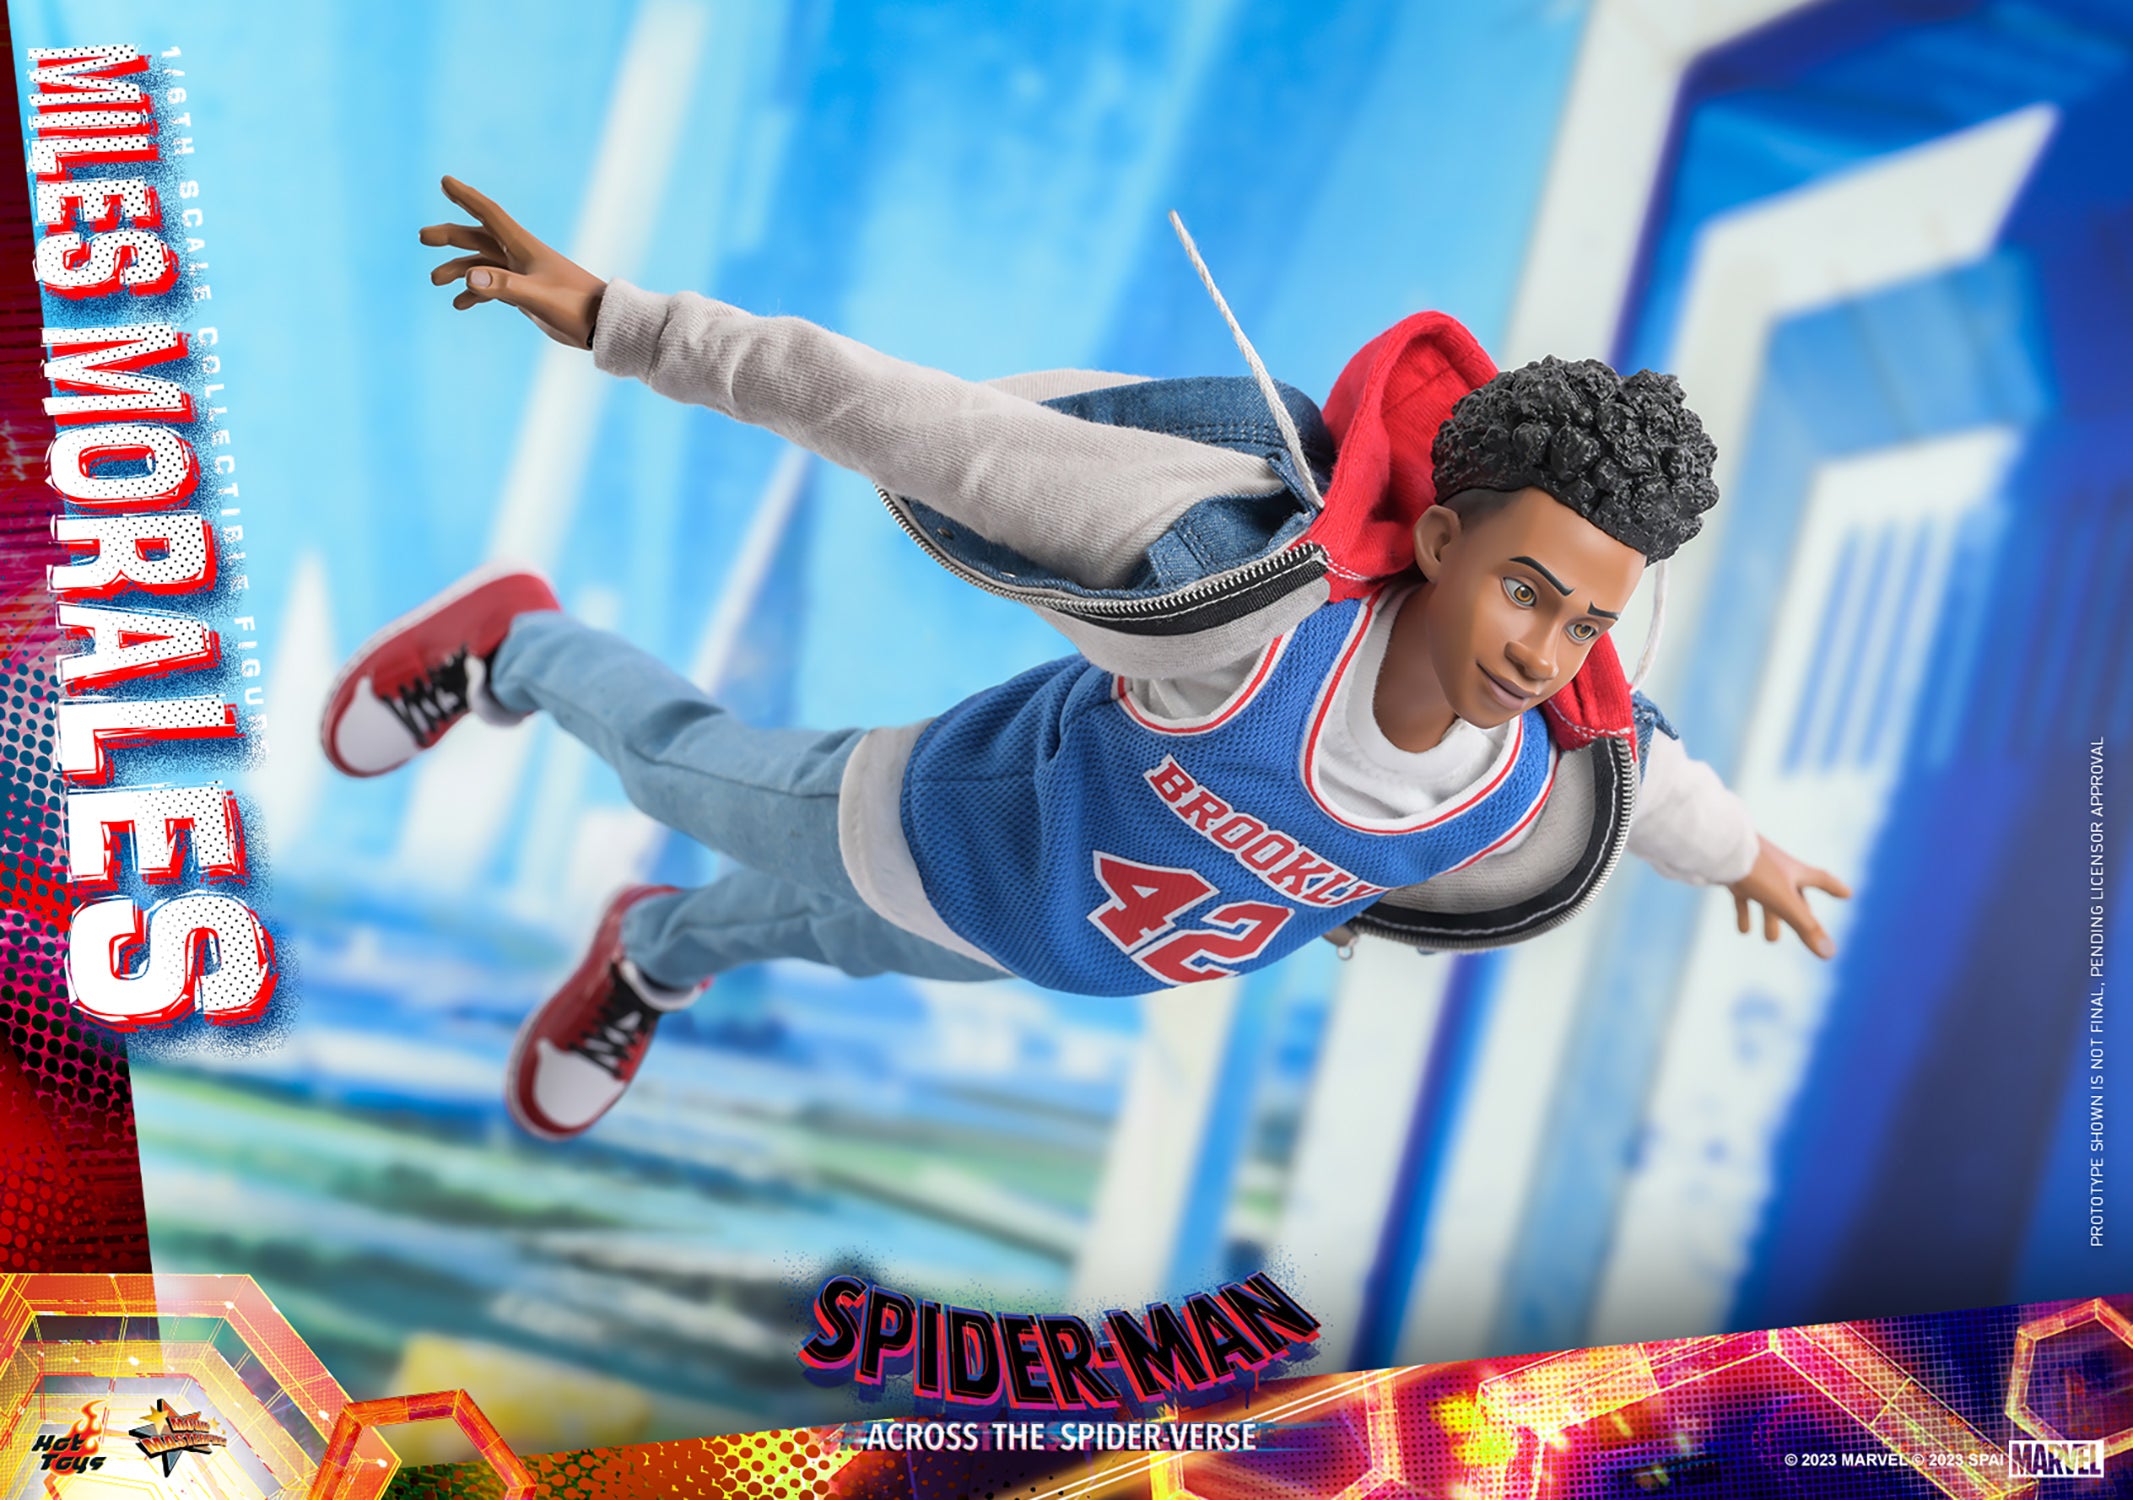 Miles Morales: Spider-Man: Across The Spider-Verse: Marvel: Hot Toys